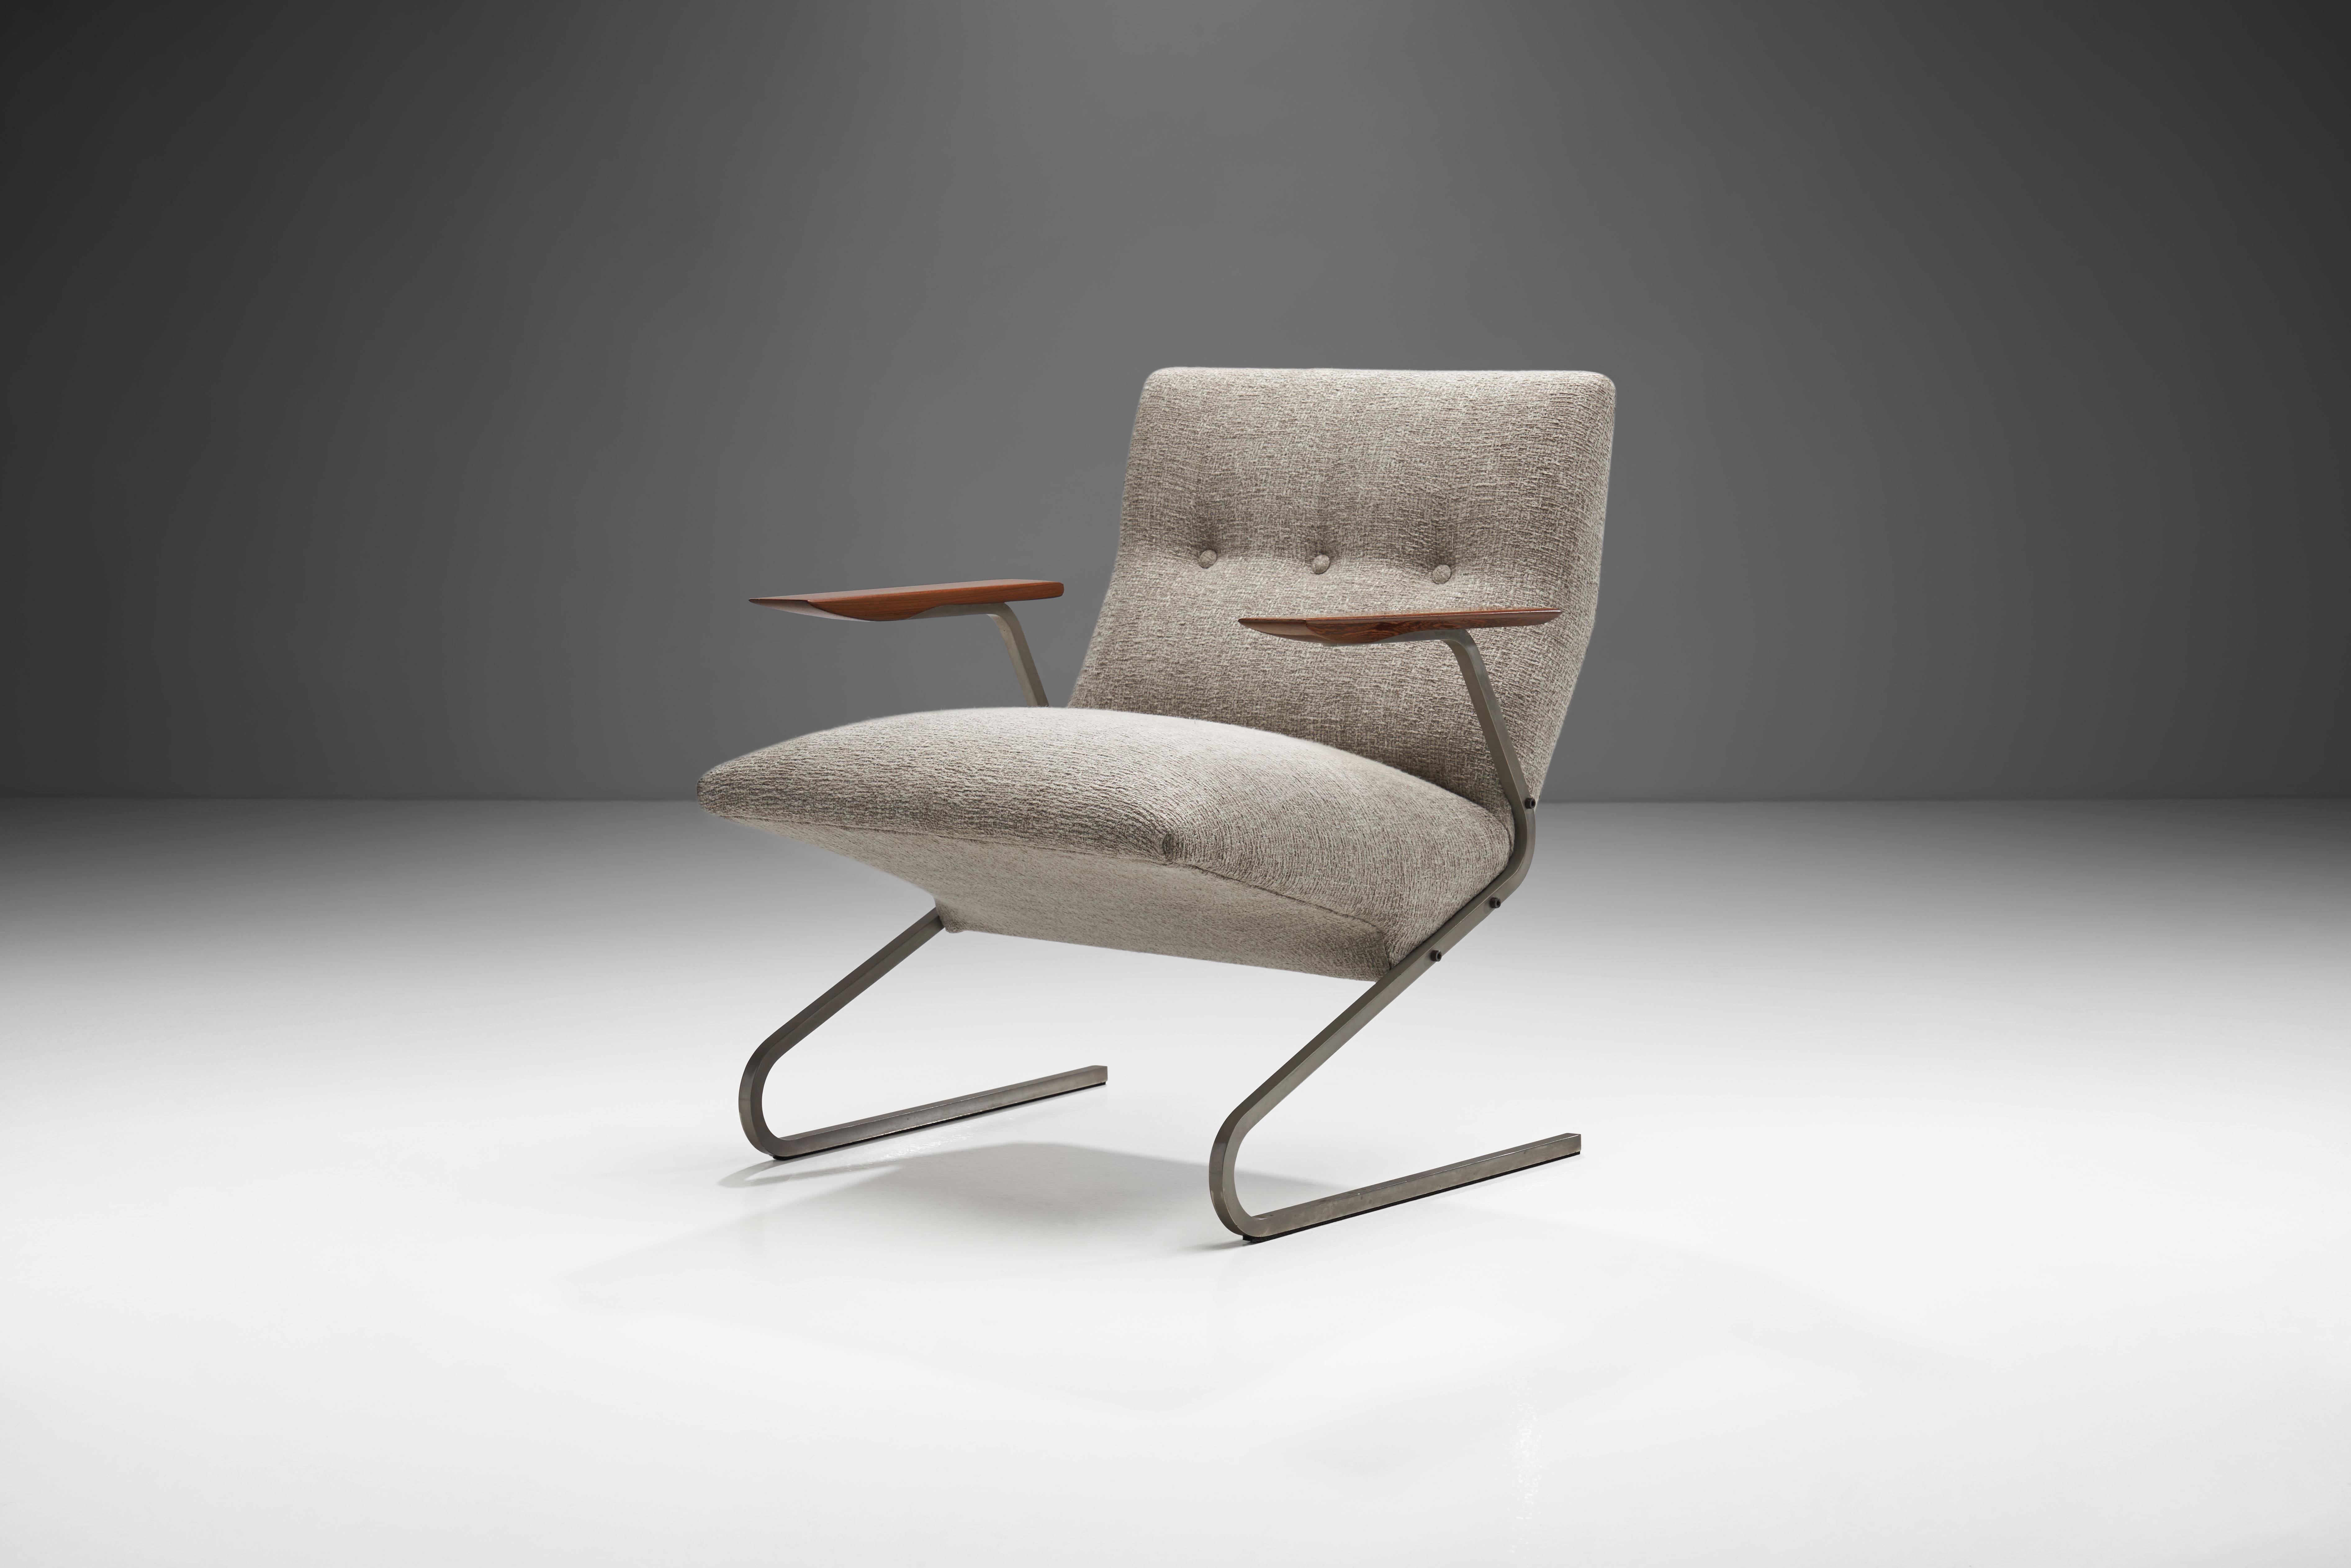 This eye-catching mid-century armchair is the design of the Belgian designer, George van Rijck (also spelled as Georges Van Vanrijk).

The main design element of this playful chair is the tubular, bent metal frame that comprises the body. There is